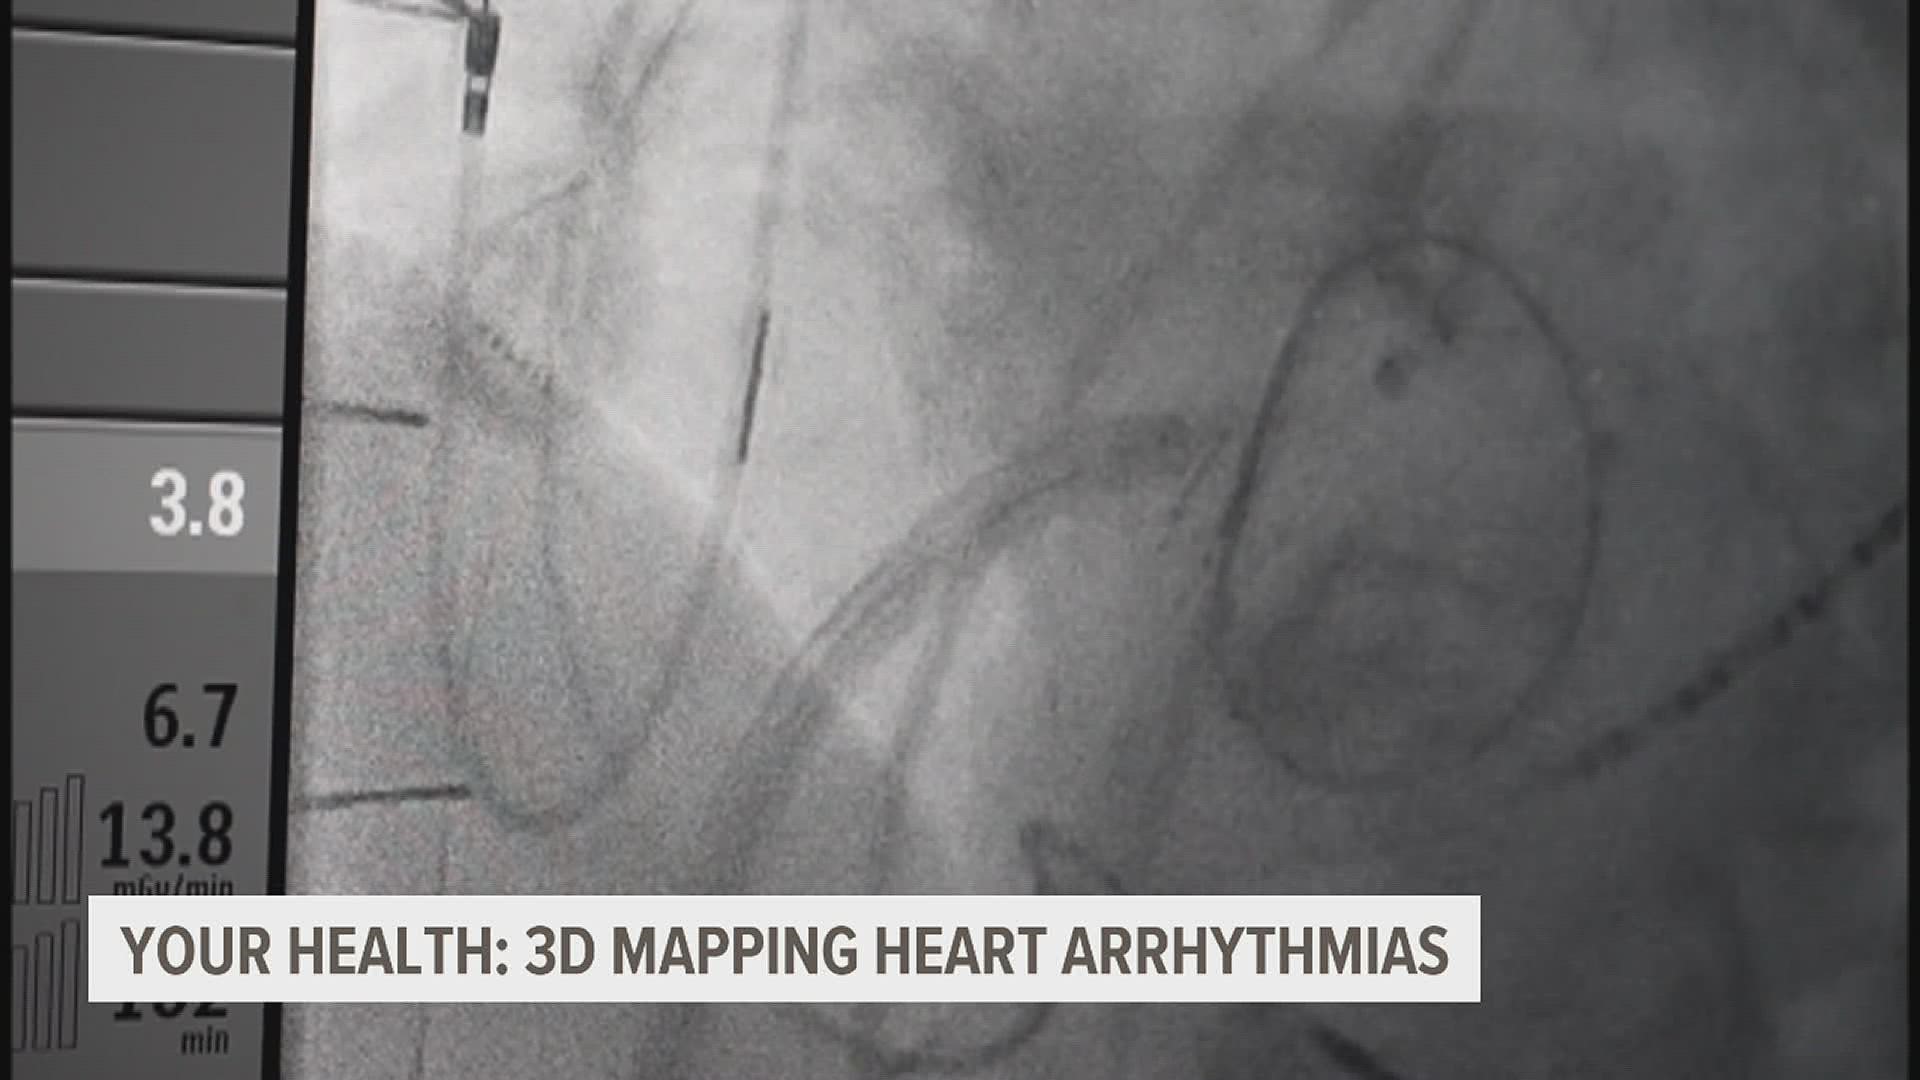 One in 18 people in the U.S. has heart arrhythmia. But now, for the first time in America, researchers are using a 3D mapping system to help treat the disorder.